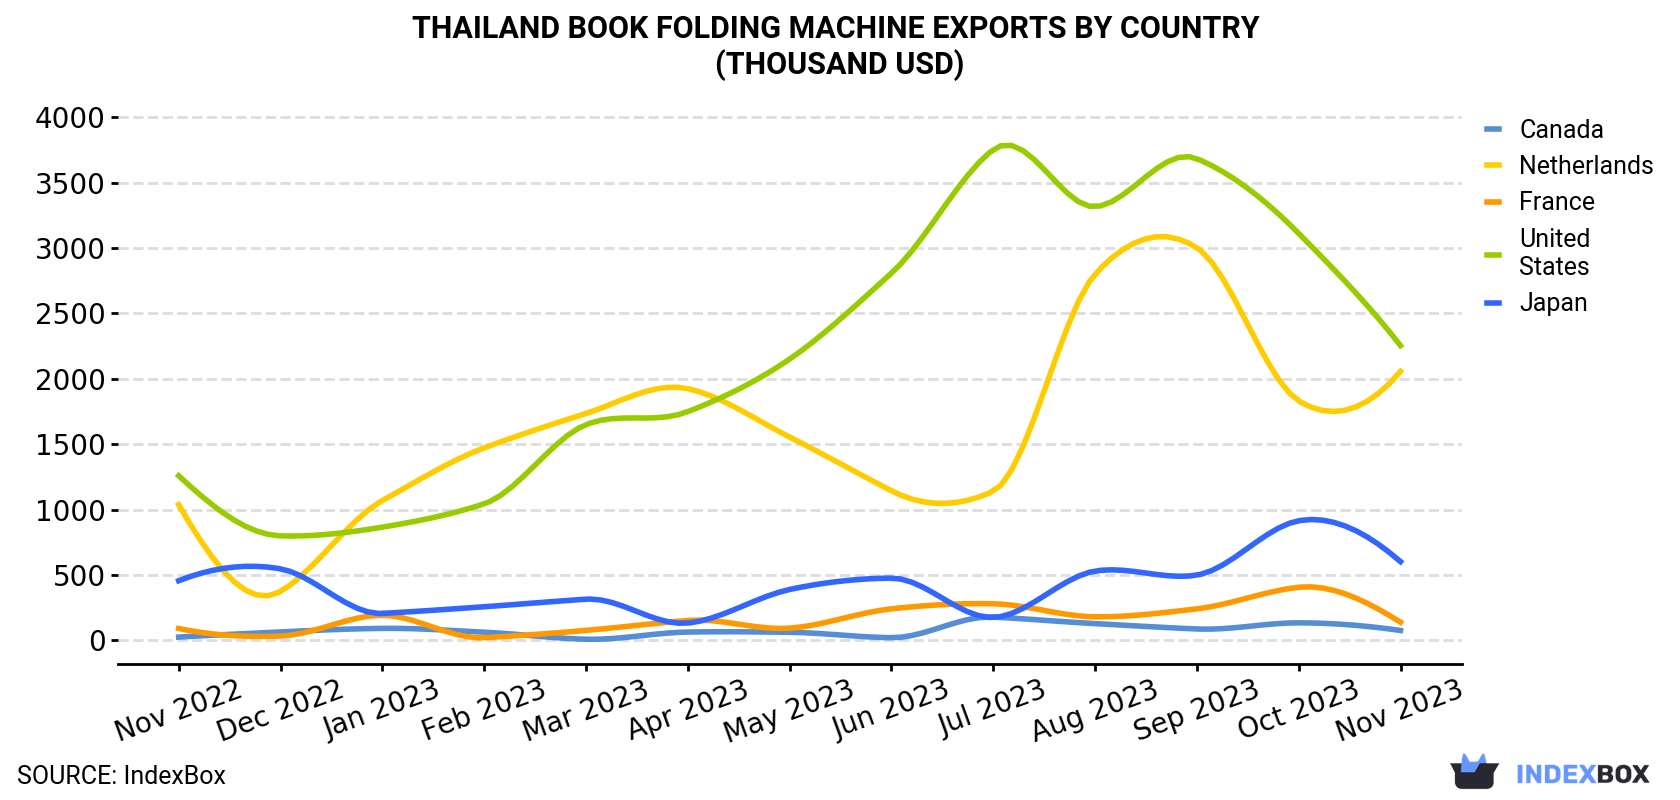 Thailand Book Folding Machine Exports By Country (Thousand USD)